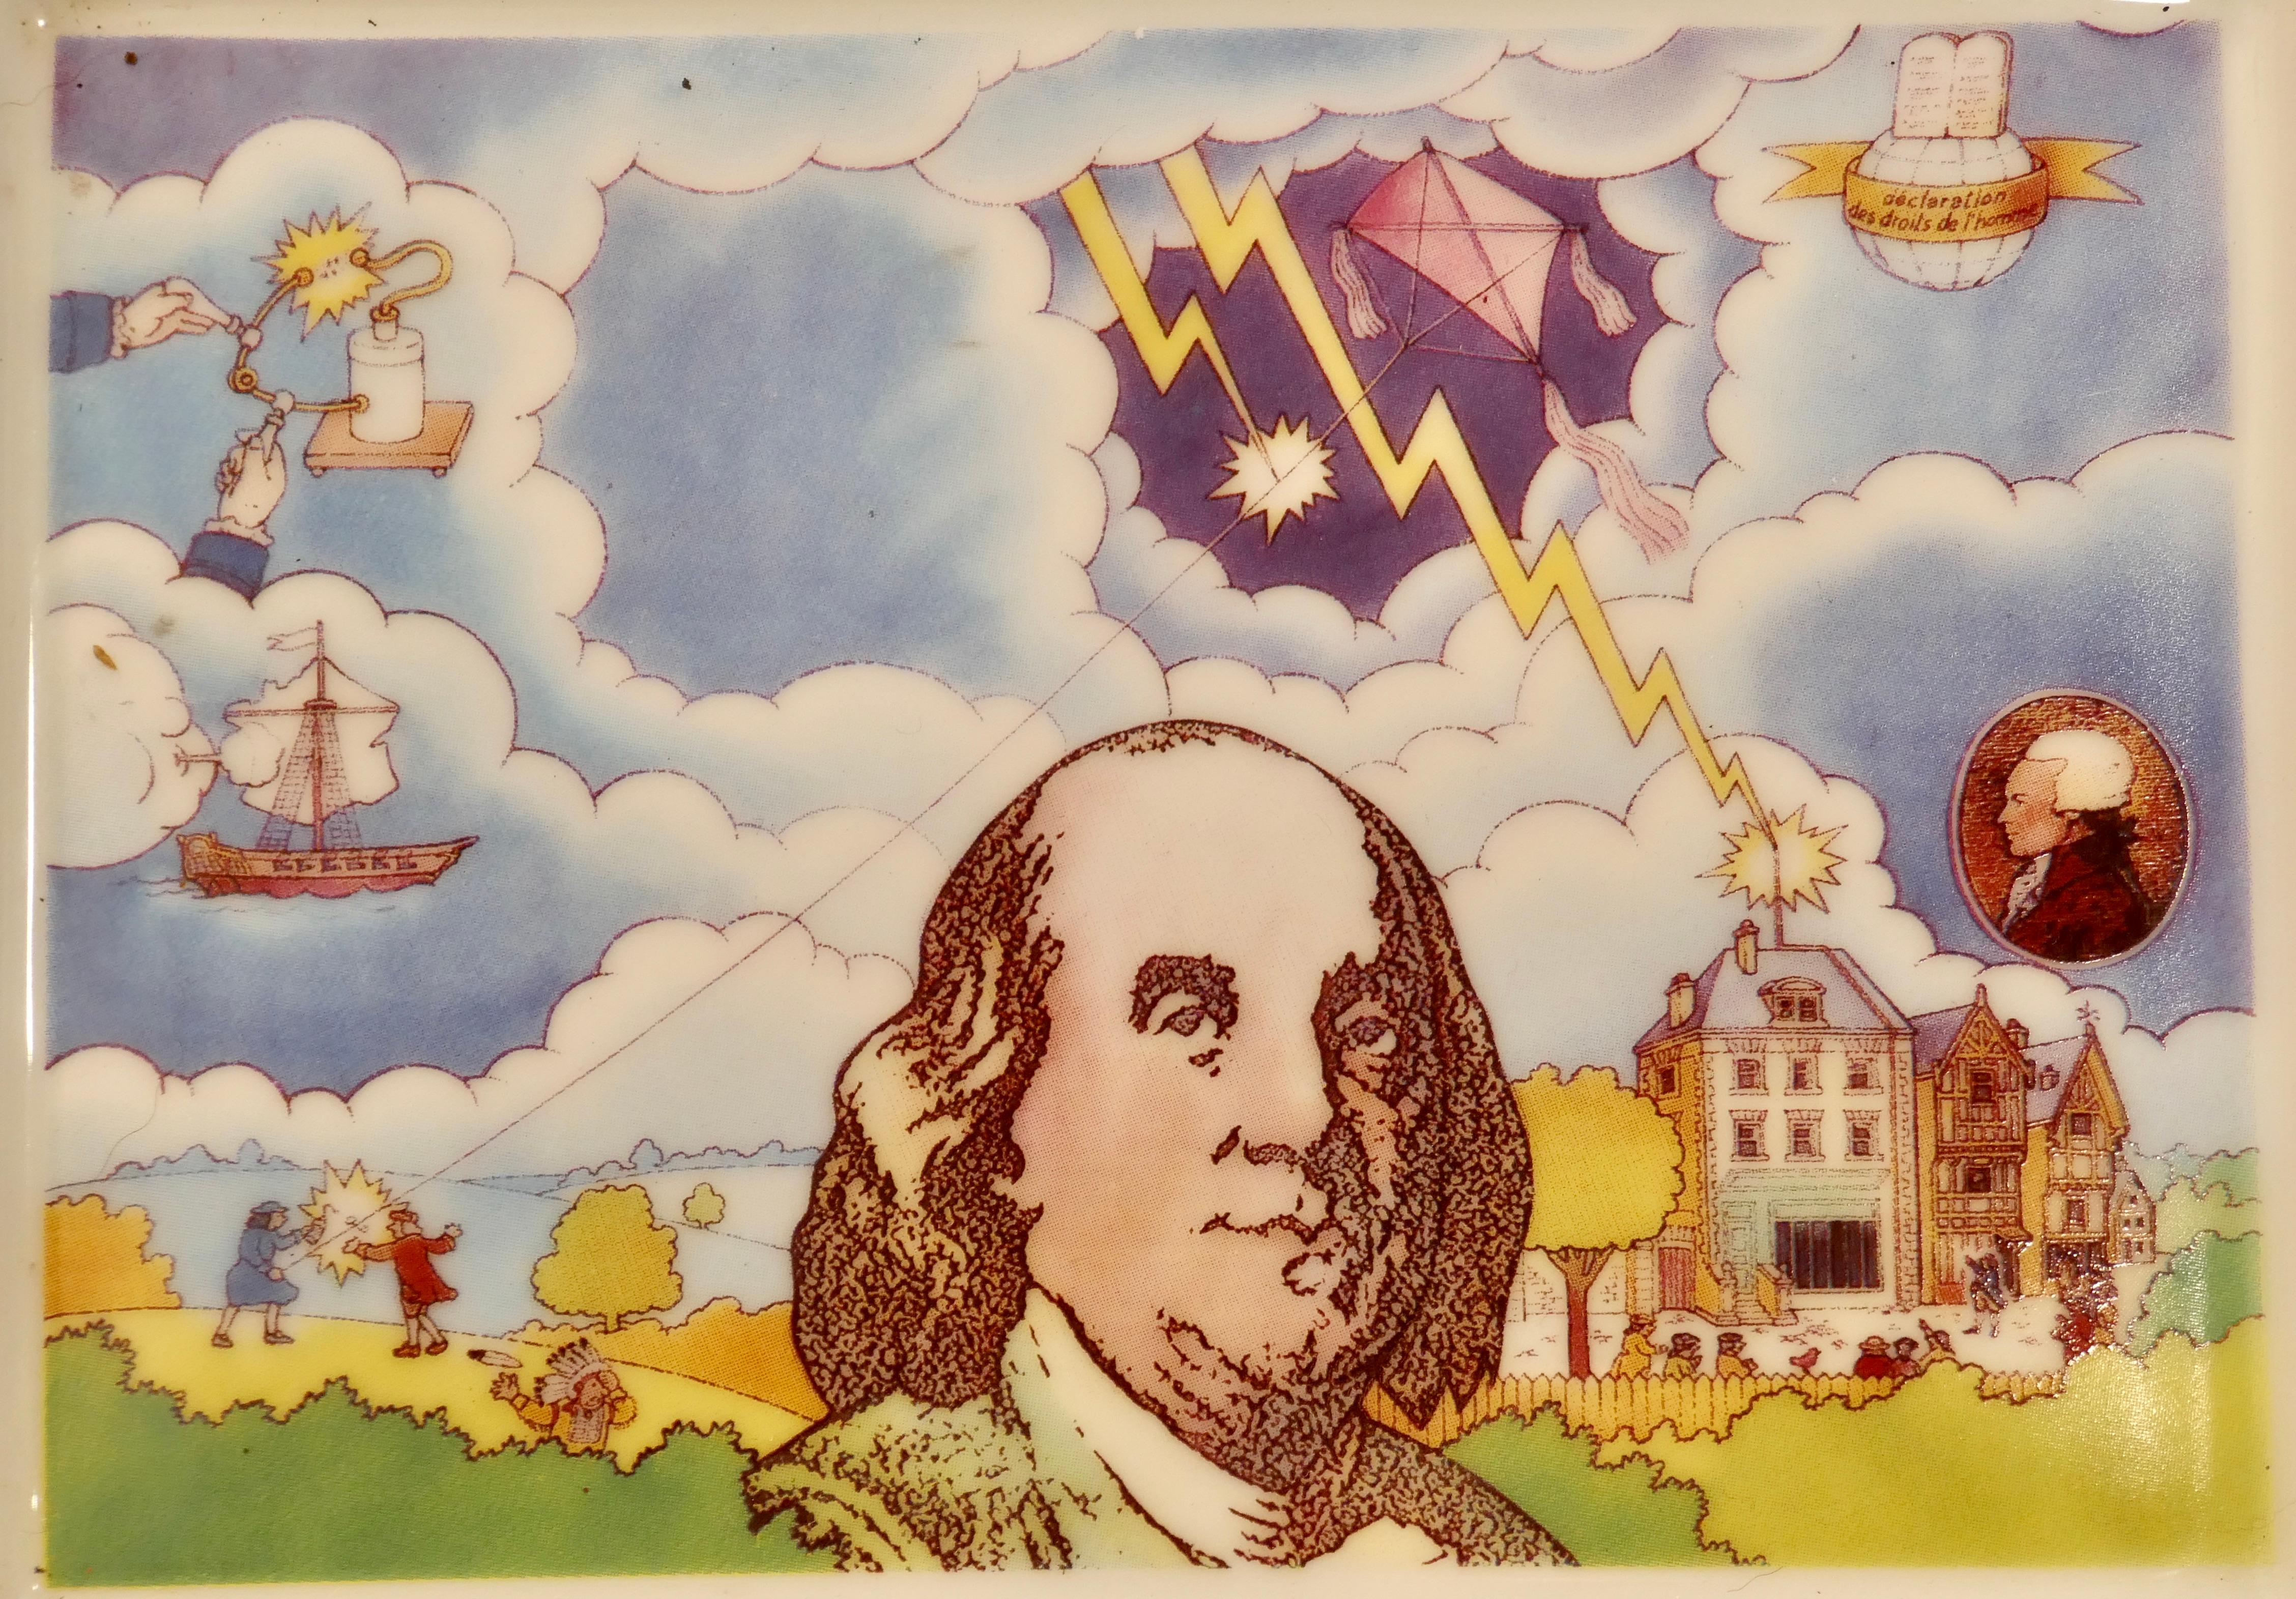 Polychrome dish commemorating Benjamin Franklin’s Discovery of Electricity by L De Boynes


Benjamin Franklin one of the founding fathers of the USA and a very brilliant scientist
In 1752 he conducted his famous kite experiment.

In order to